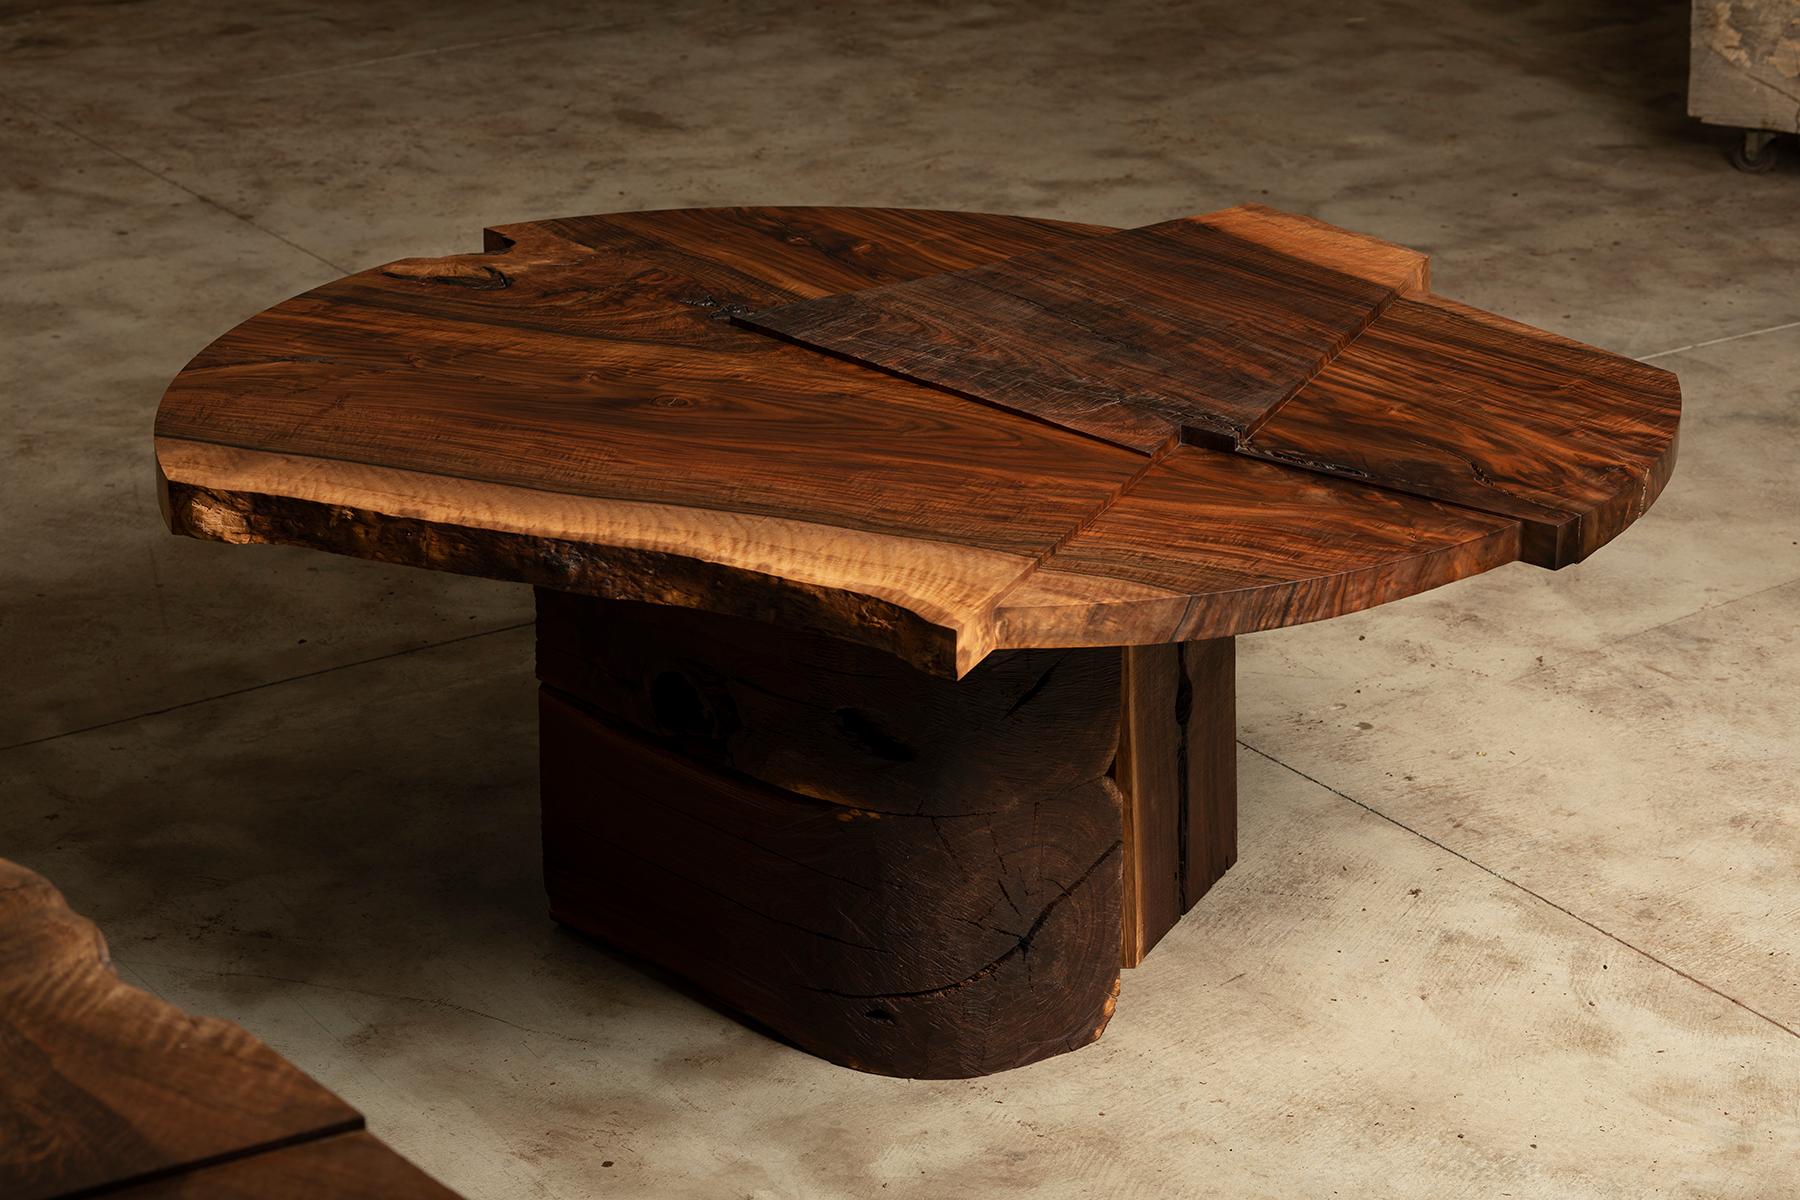 This Strike/Slip dining table 'in the round' by Taylor Donsker features a single California Walnut slab carved into a multi-tiered surface, resting upon a solid Walnut beam base. The result is a sculpted table that offers a functional composition